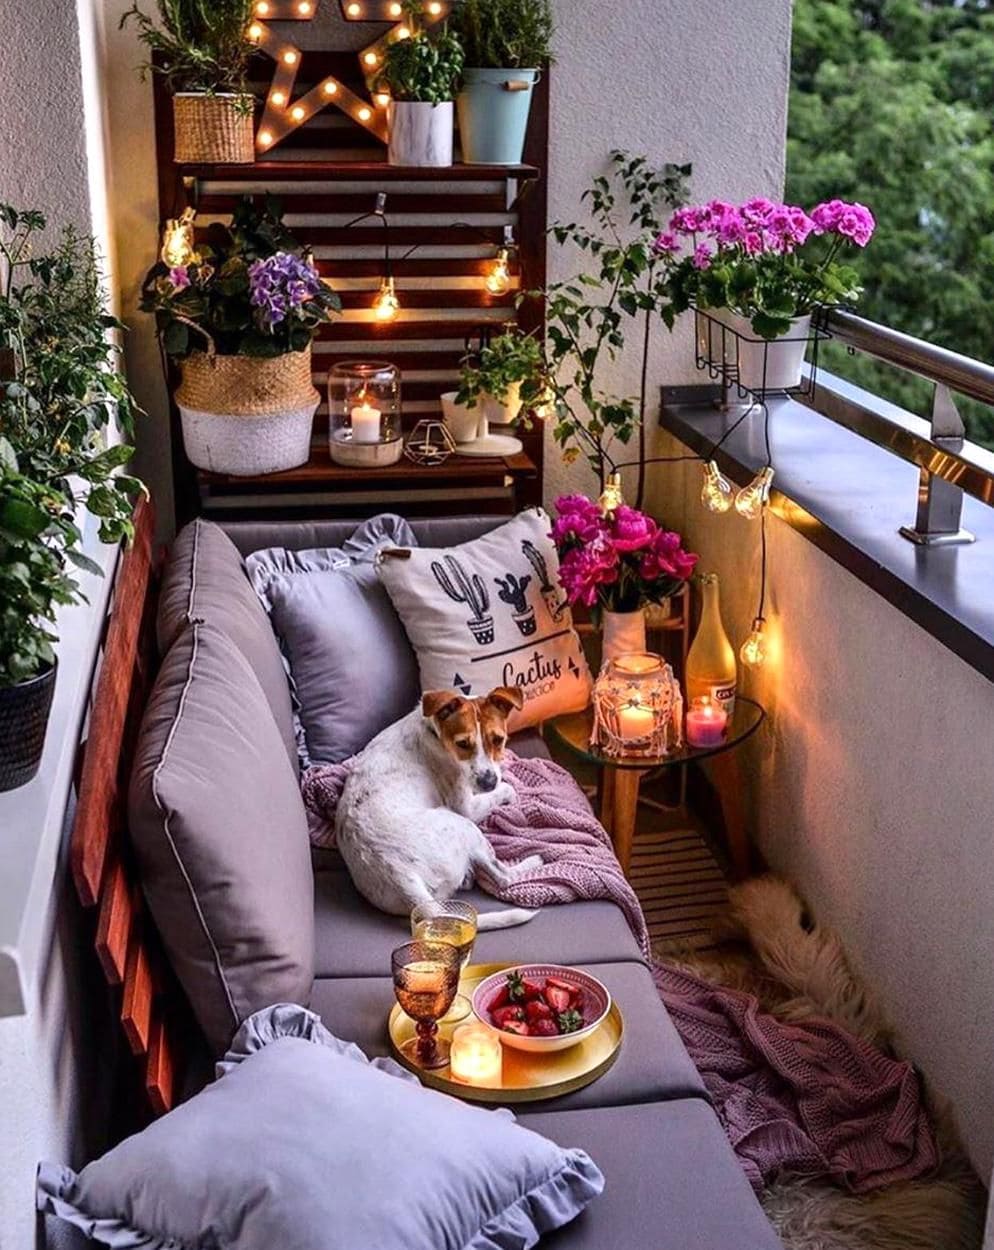 25 clever ways to organize small balconies - 73